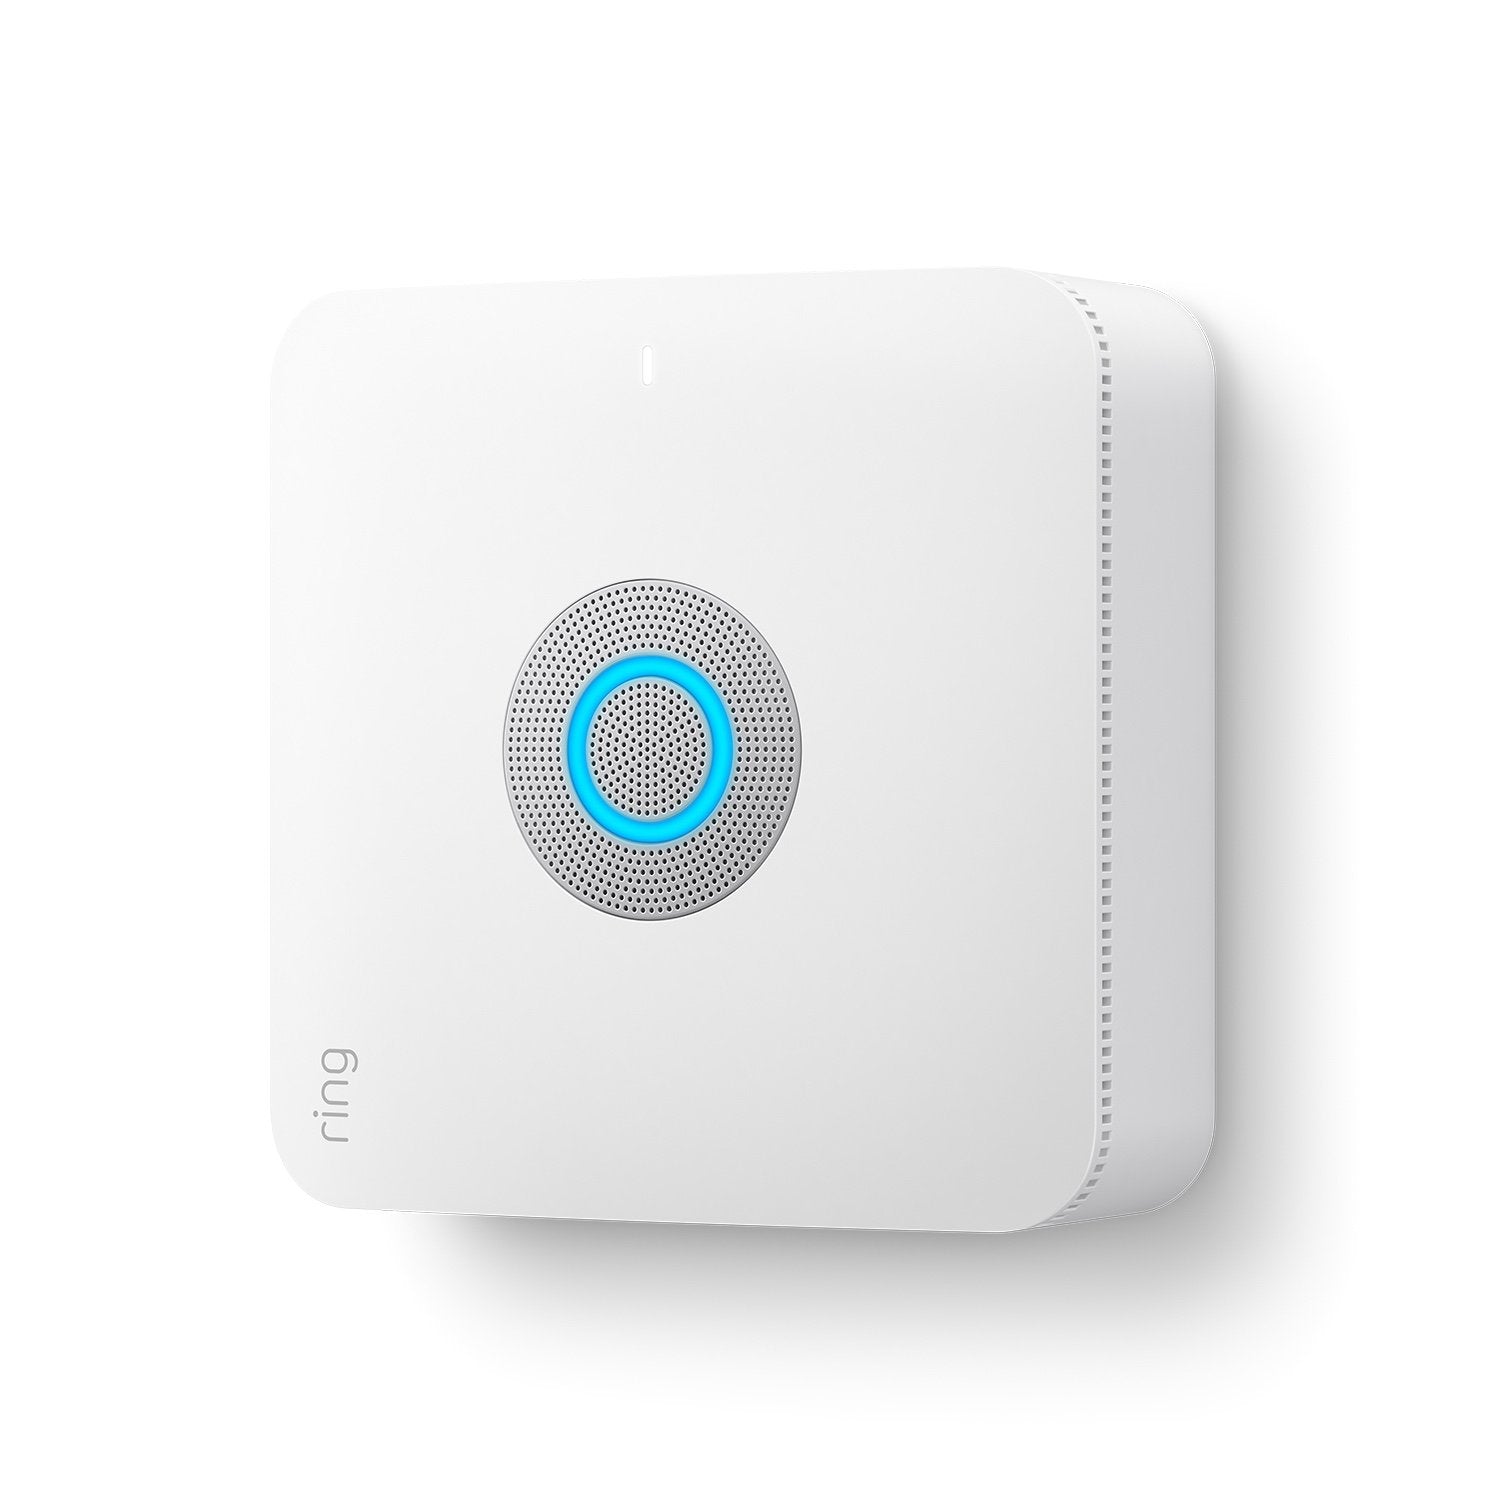 Alarm Pro Base Station (for with built-in eero Wi-Fi 6 router) - White